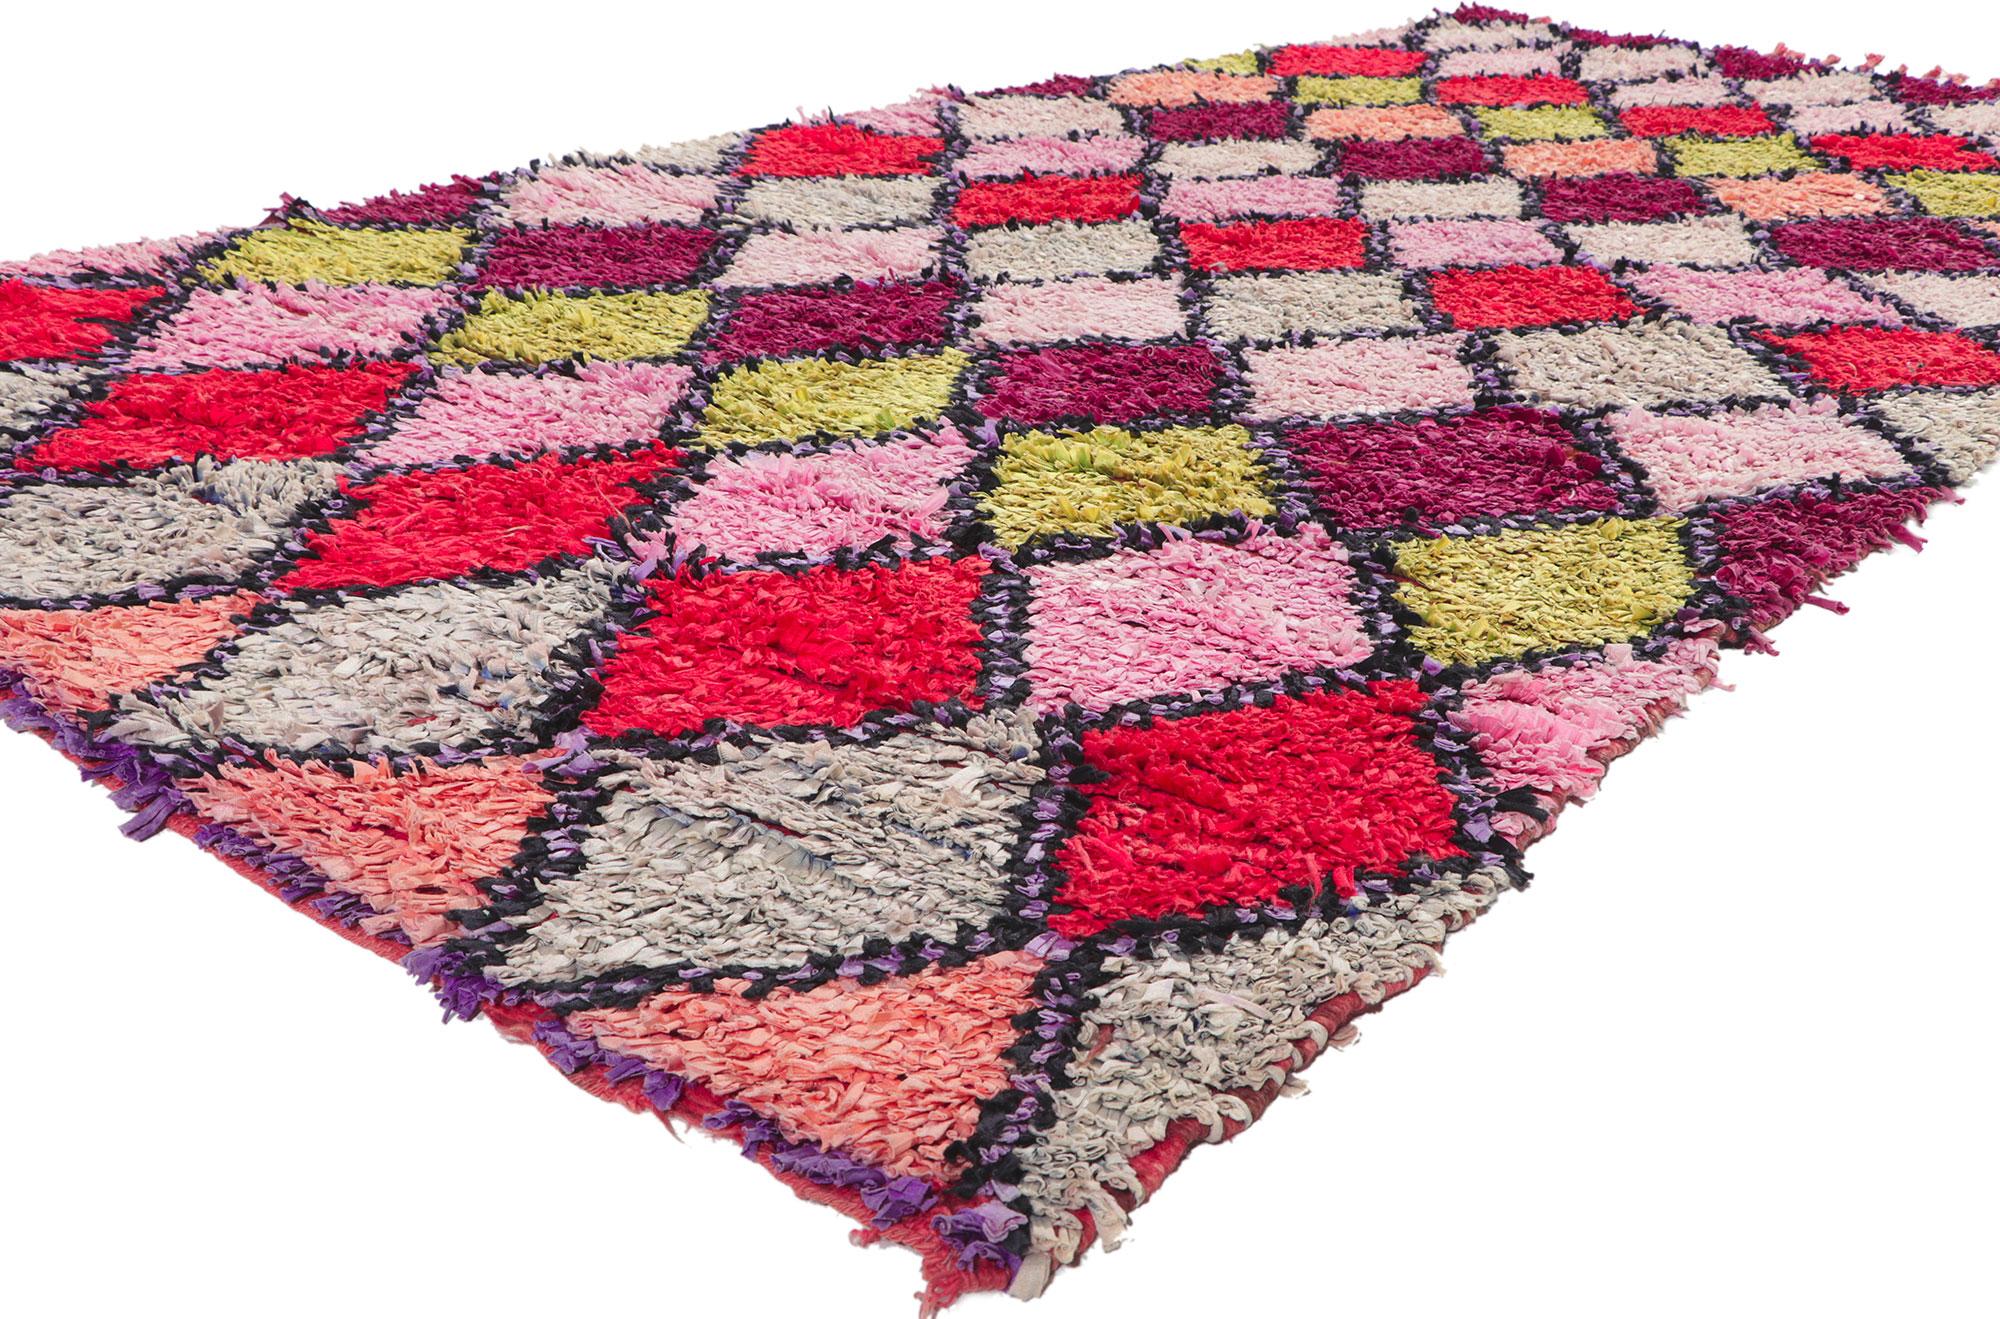 78362 Vintage Moroccan Rag rug Boucherouite, 05'02 x 09'08. ?With its nomadic charm, incredible detail and texture, this hand knotted vintage Moroccan rag rug is a captivating vision of woven beauty. The eye-catching diamond pattern and lively